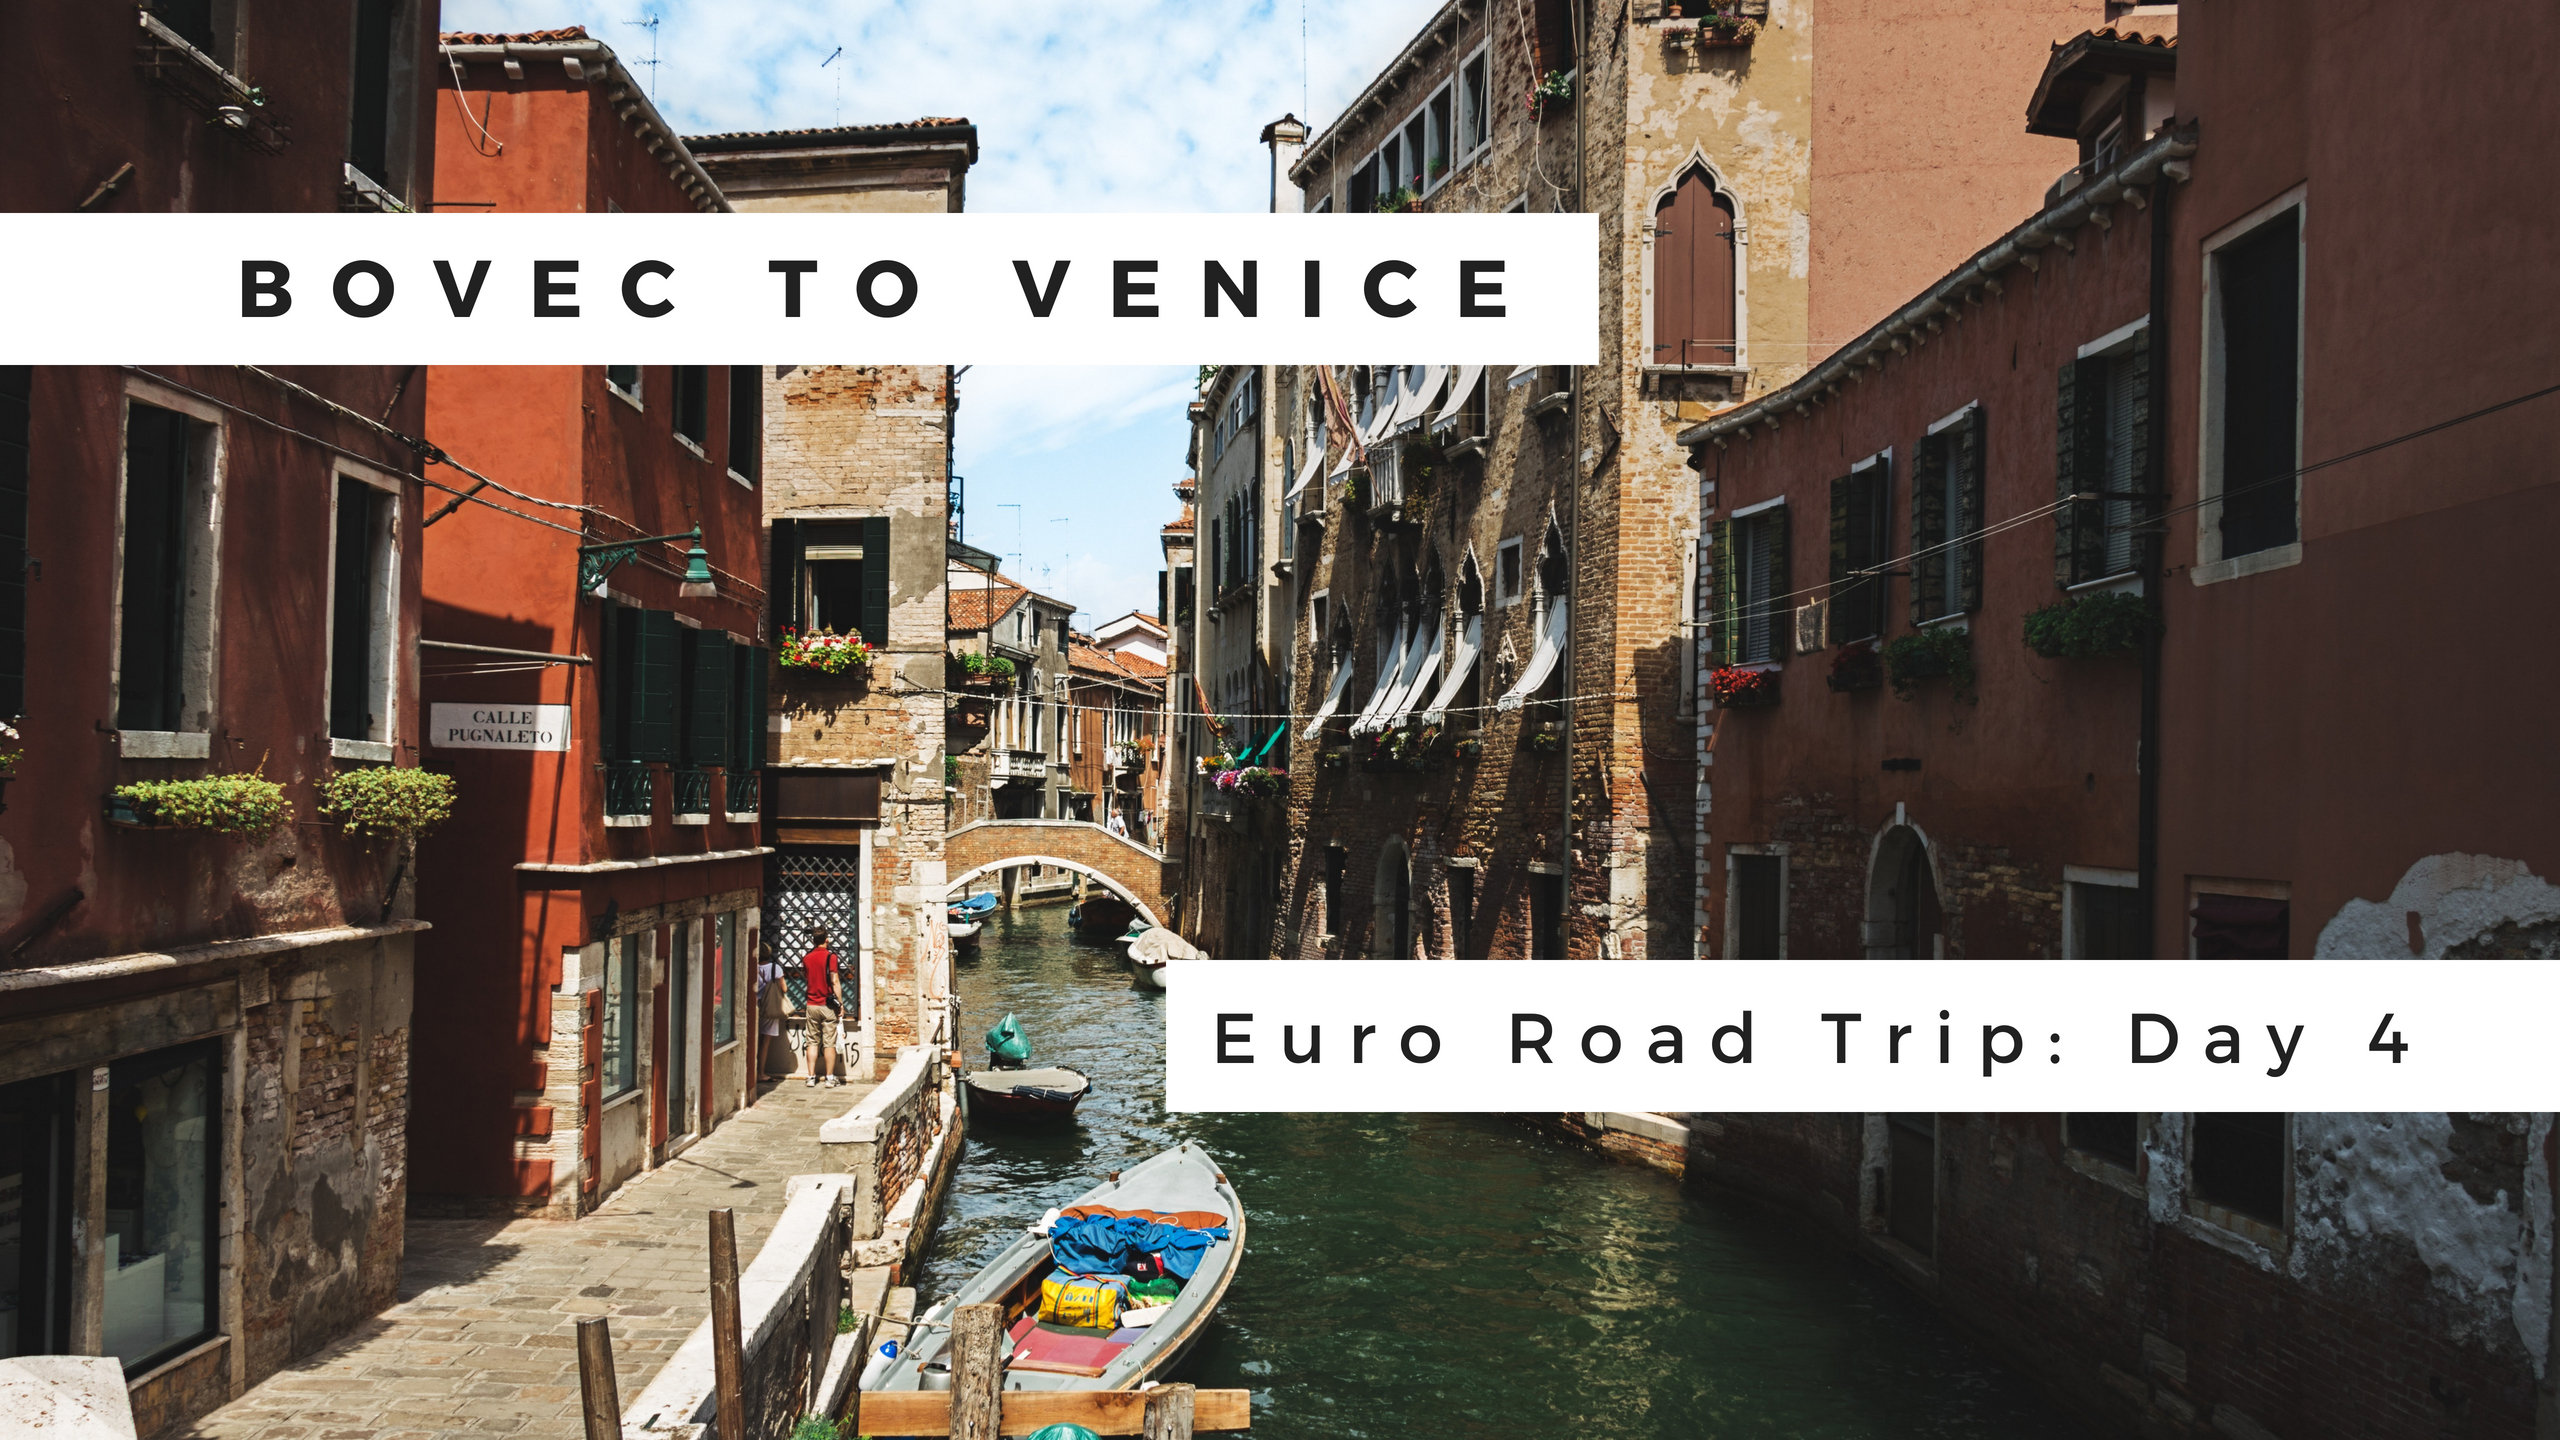 Euro Road Trip – Day 4: Bovec to Venice